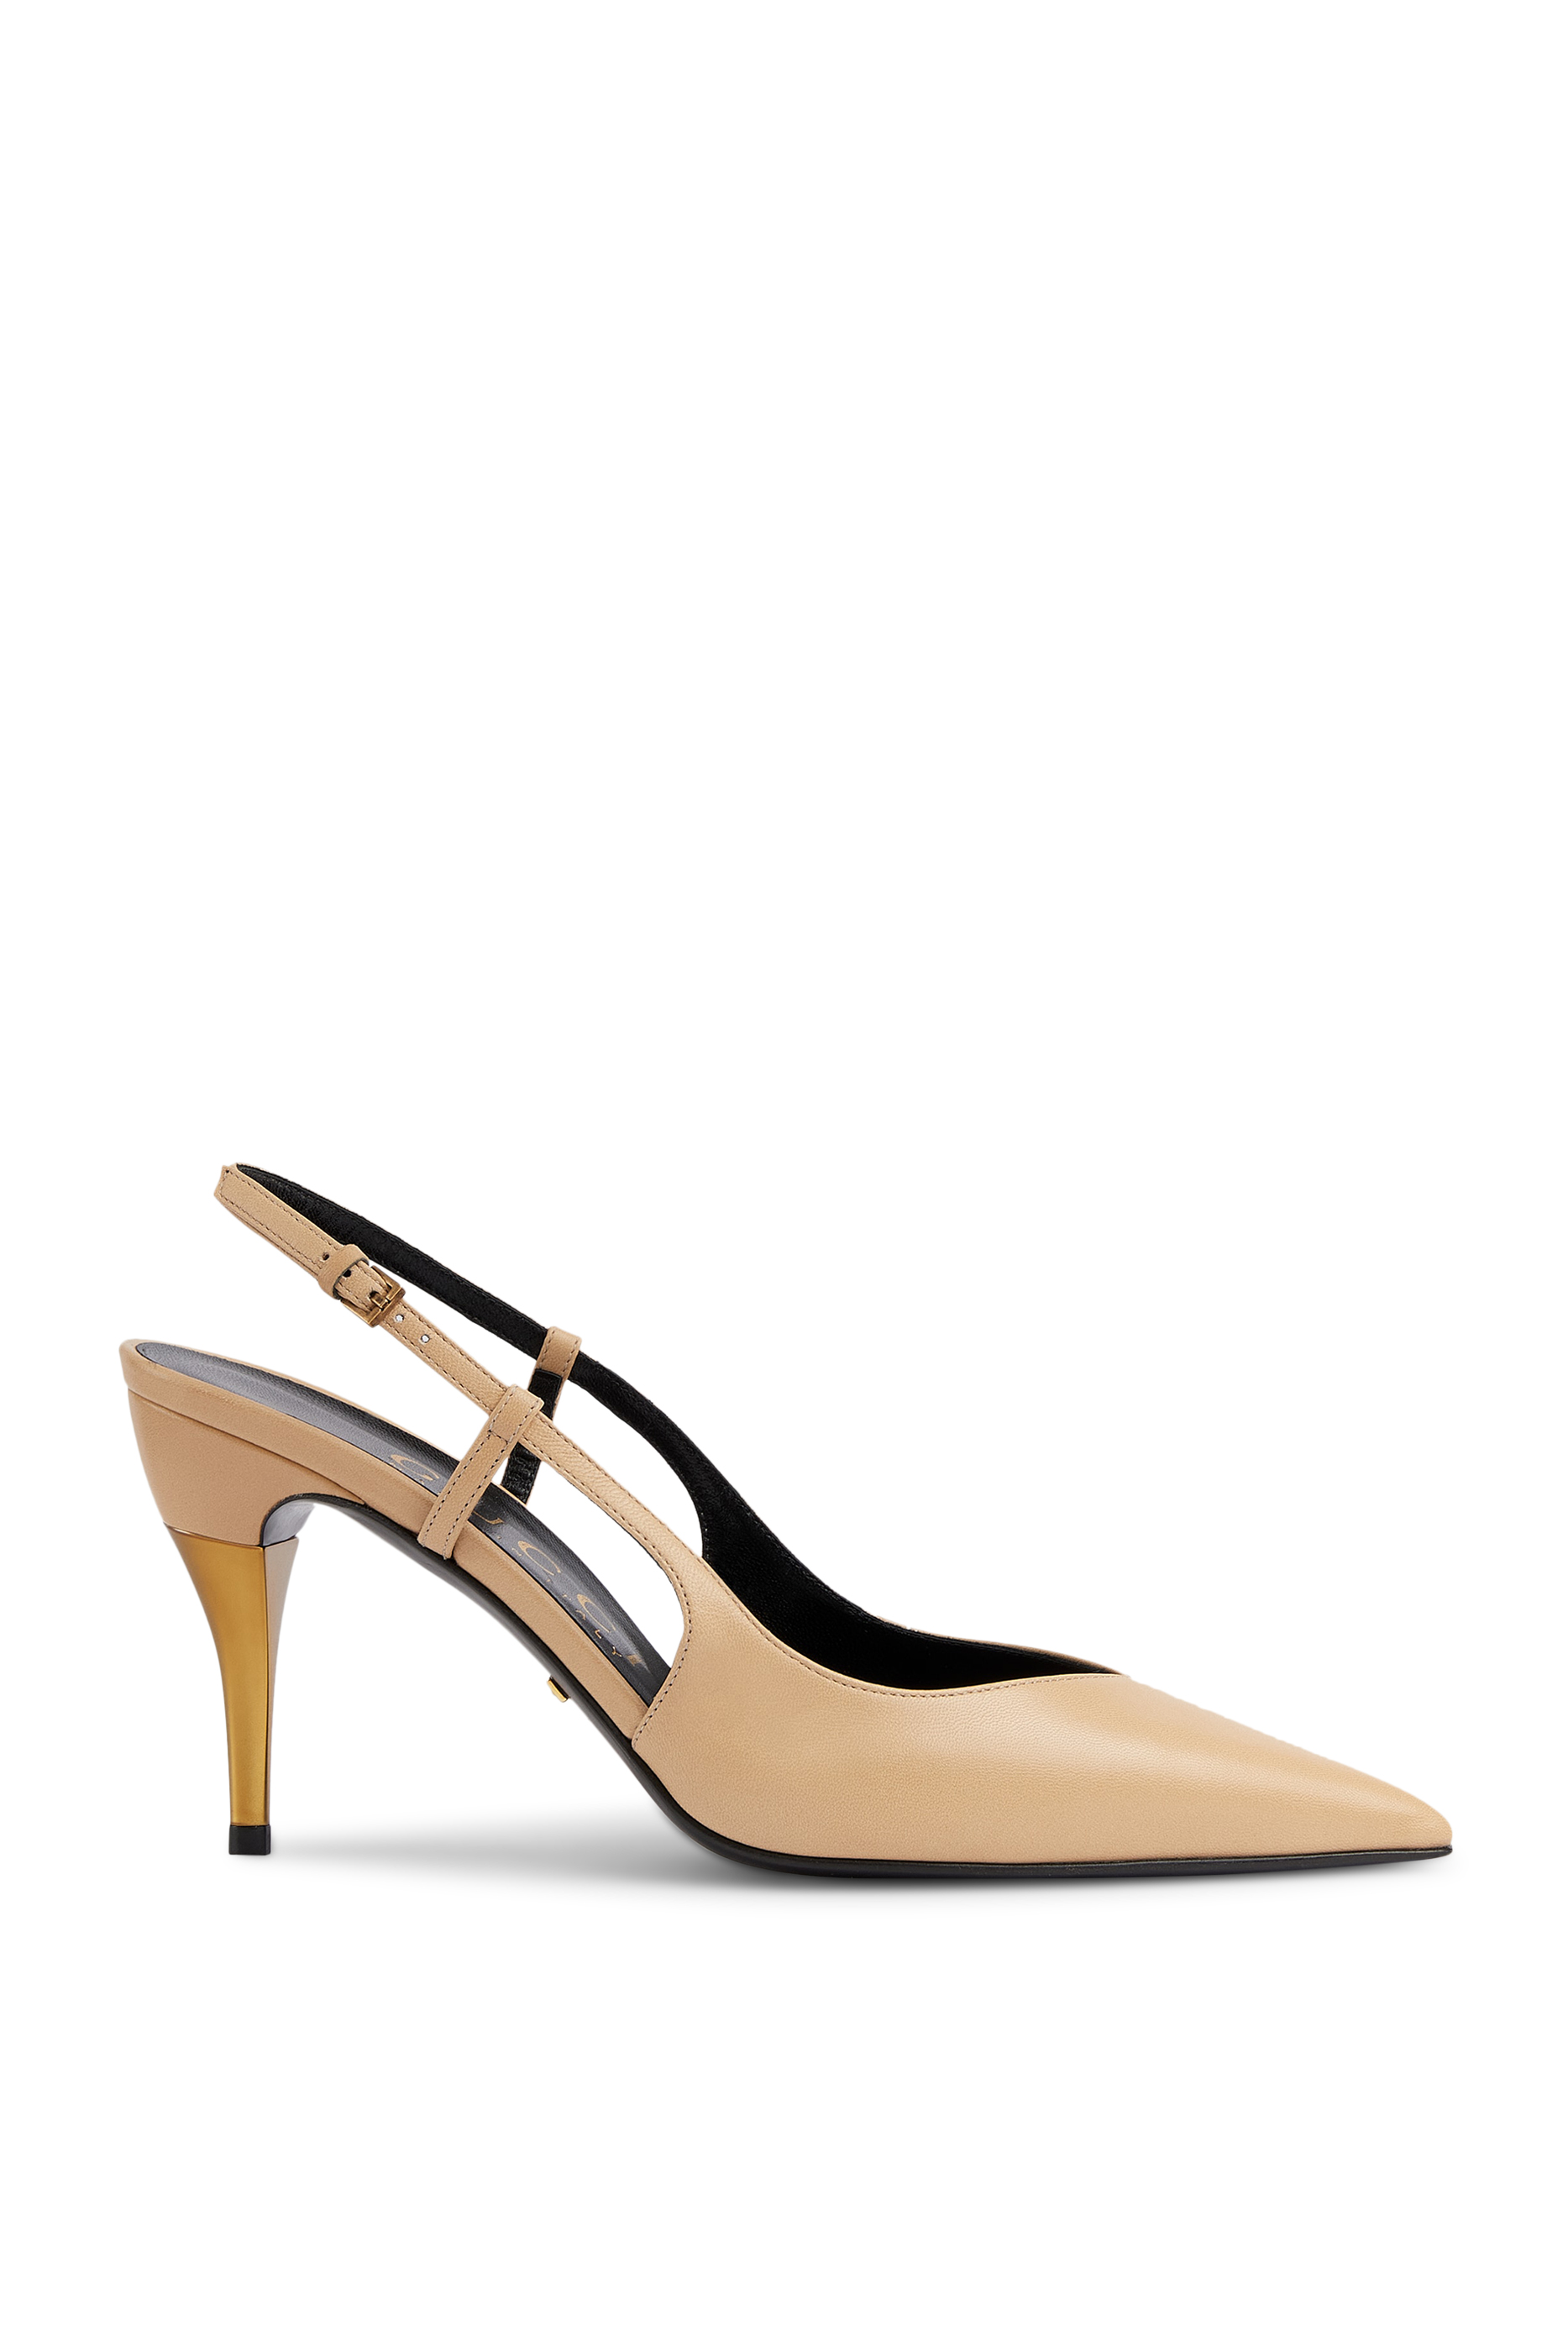 Buy Gucci Priscilla 85 Slingback Pumps for Womens | Bloomingdale's Kuwait